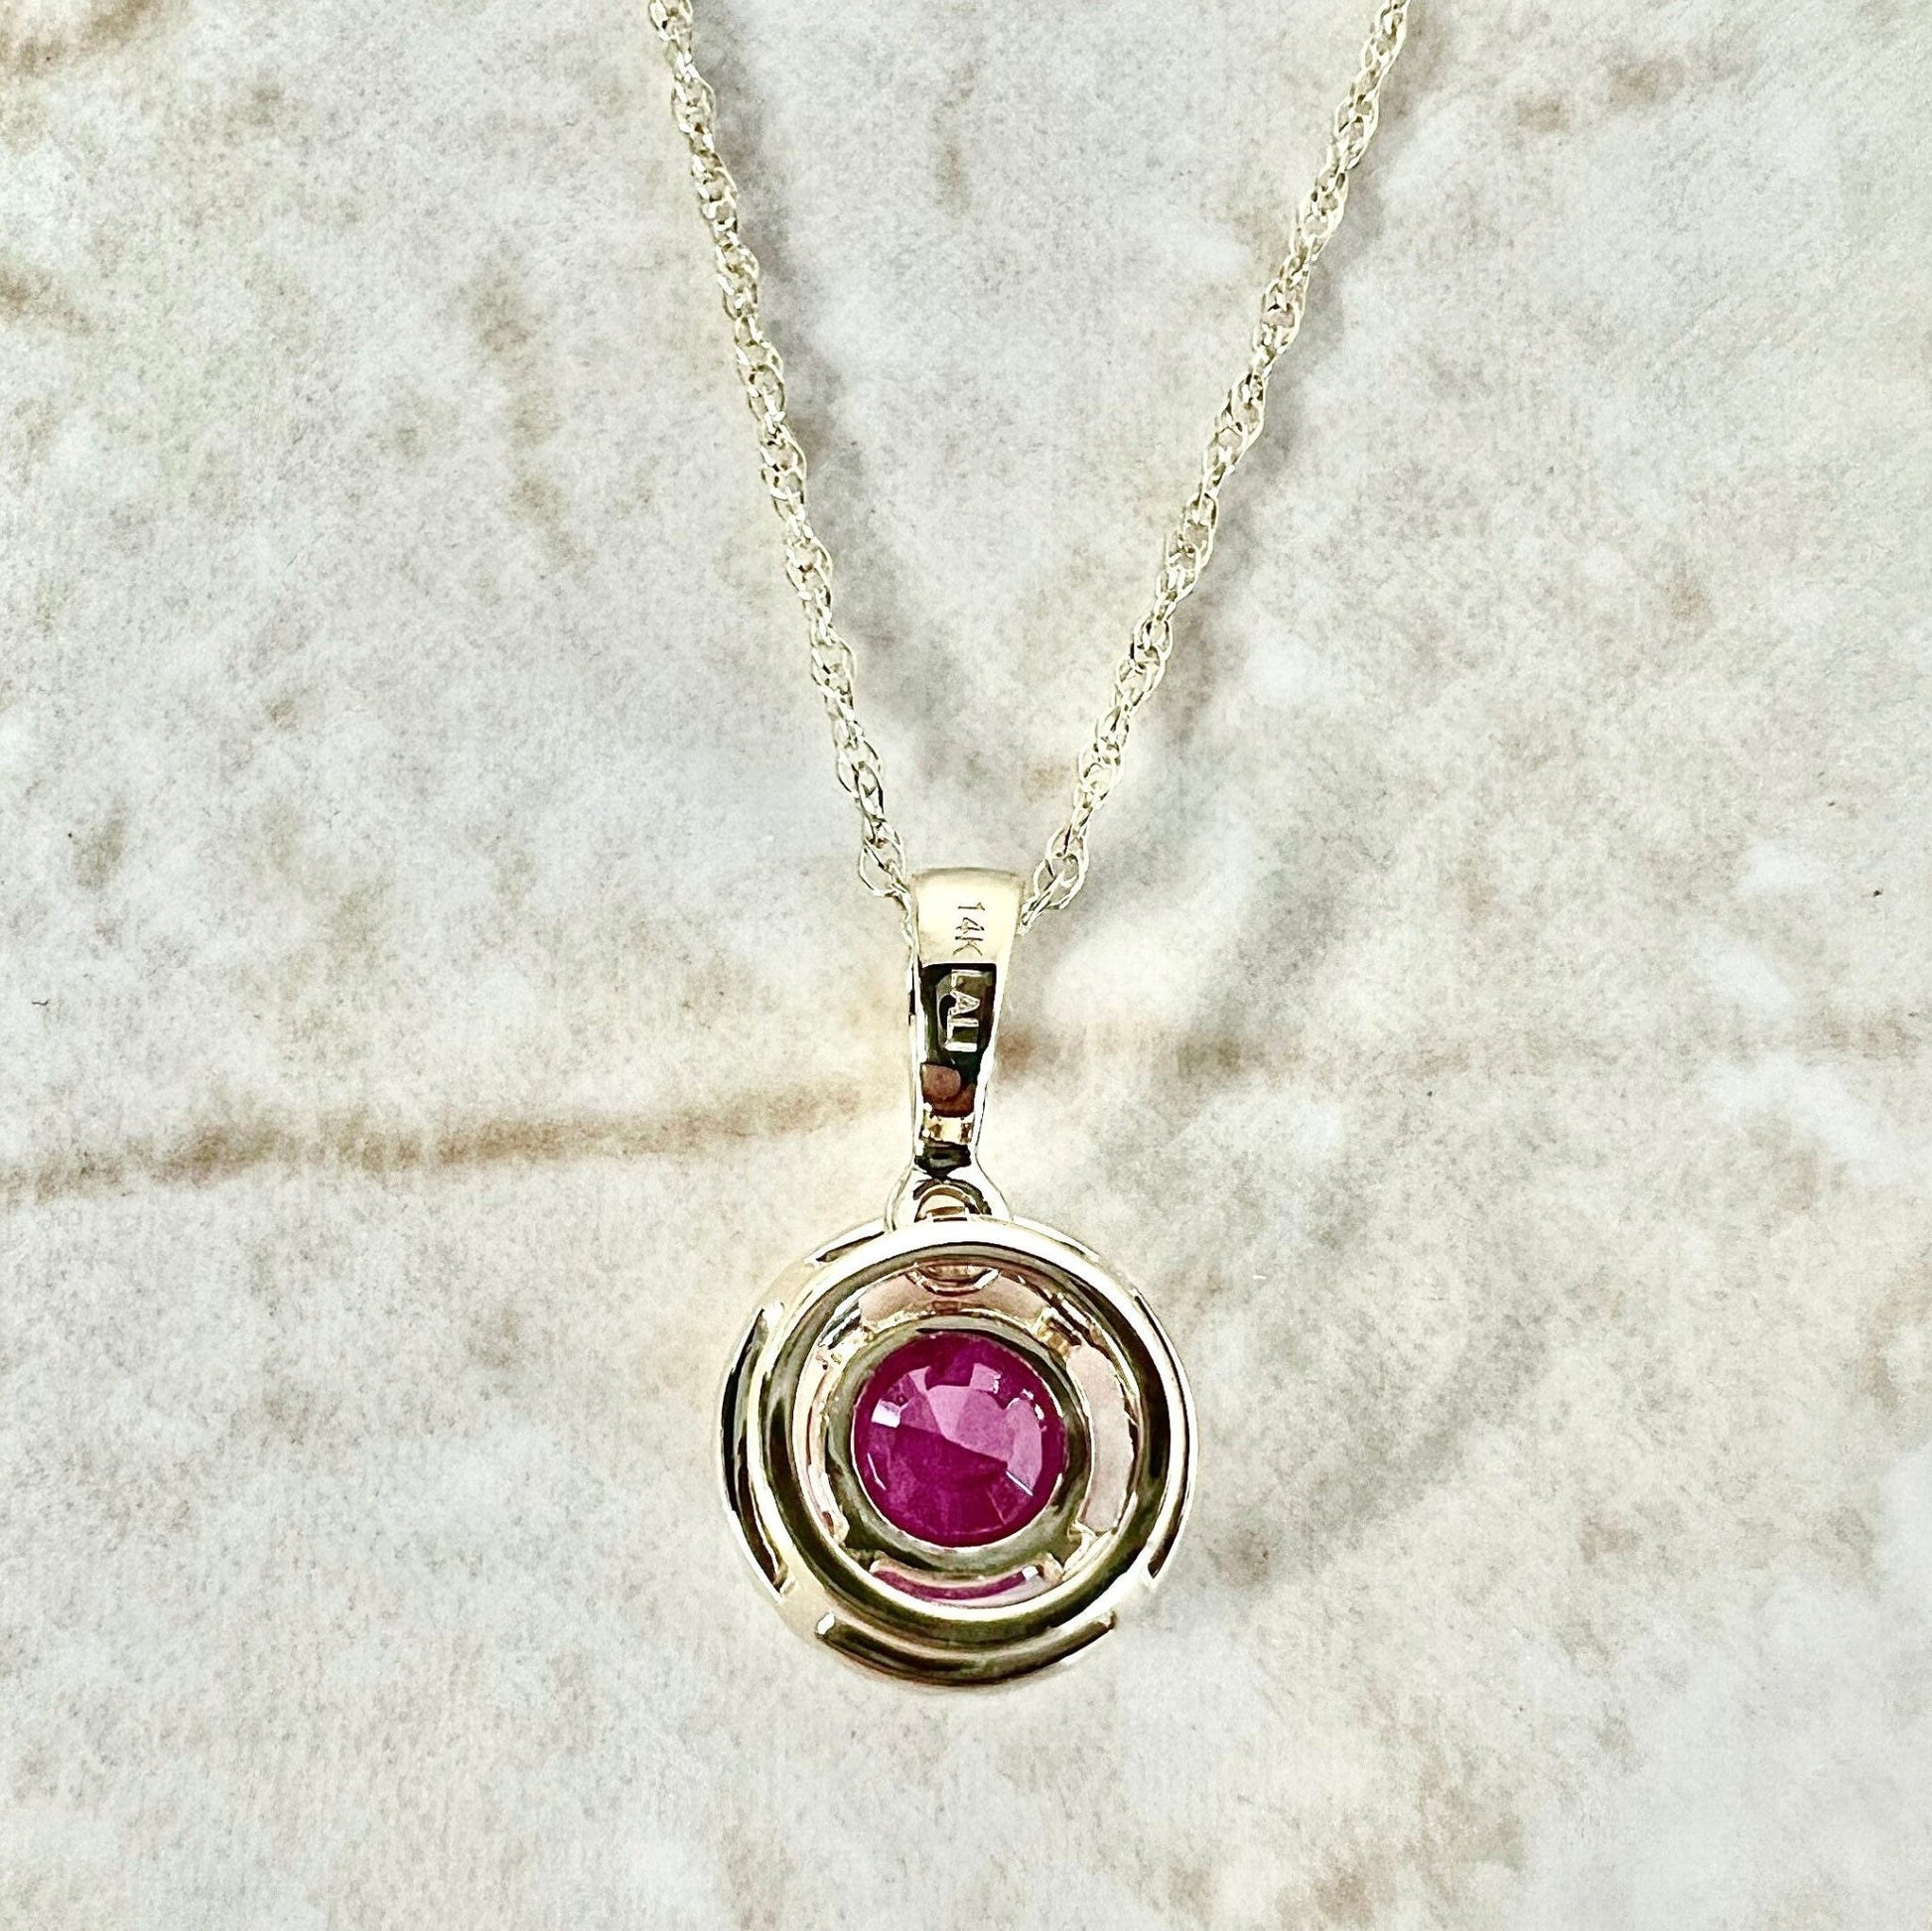 14K Round Ruby Halo Pendant Necklace - Yellow Gold Ruby Necklace - Ruby Halo Necklace - Natural Ruby Pendant - Best July Birthstone Gift